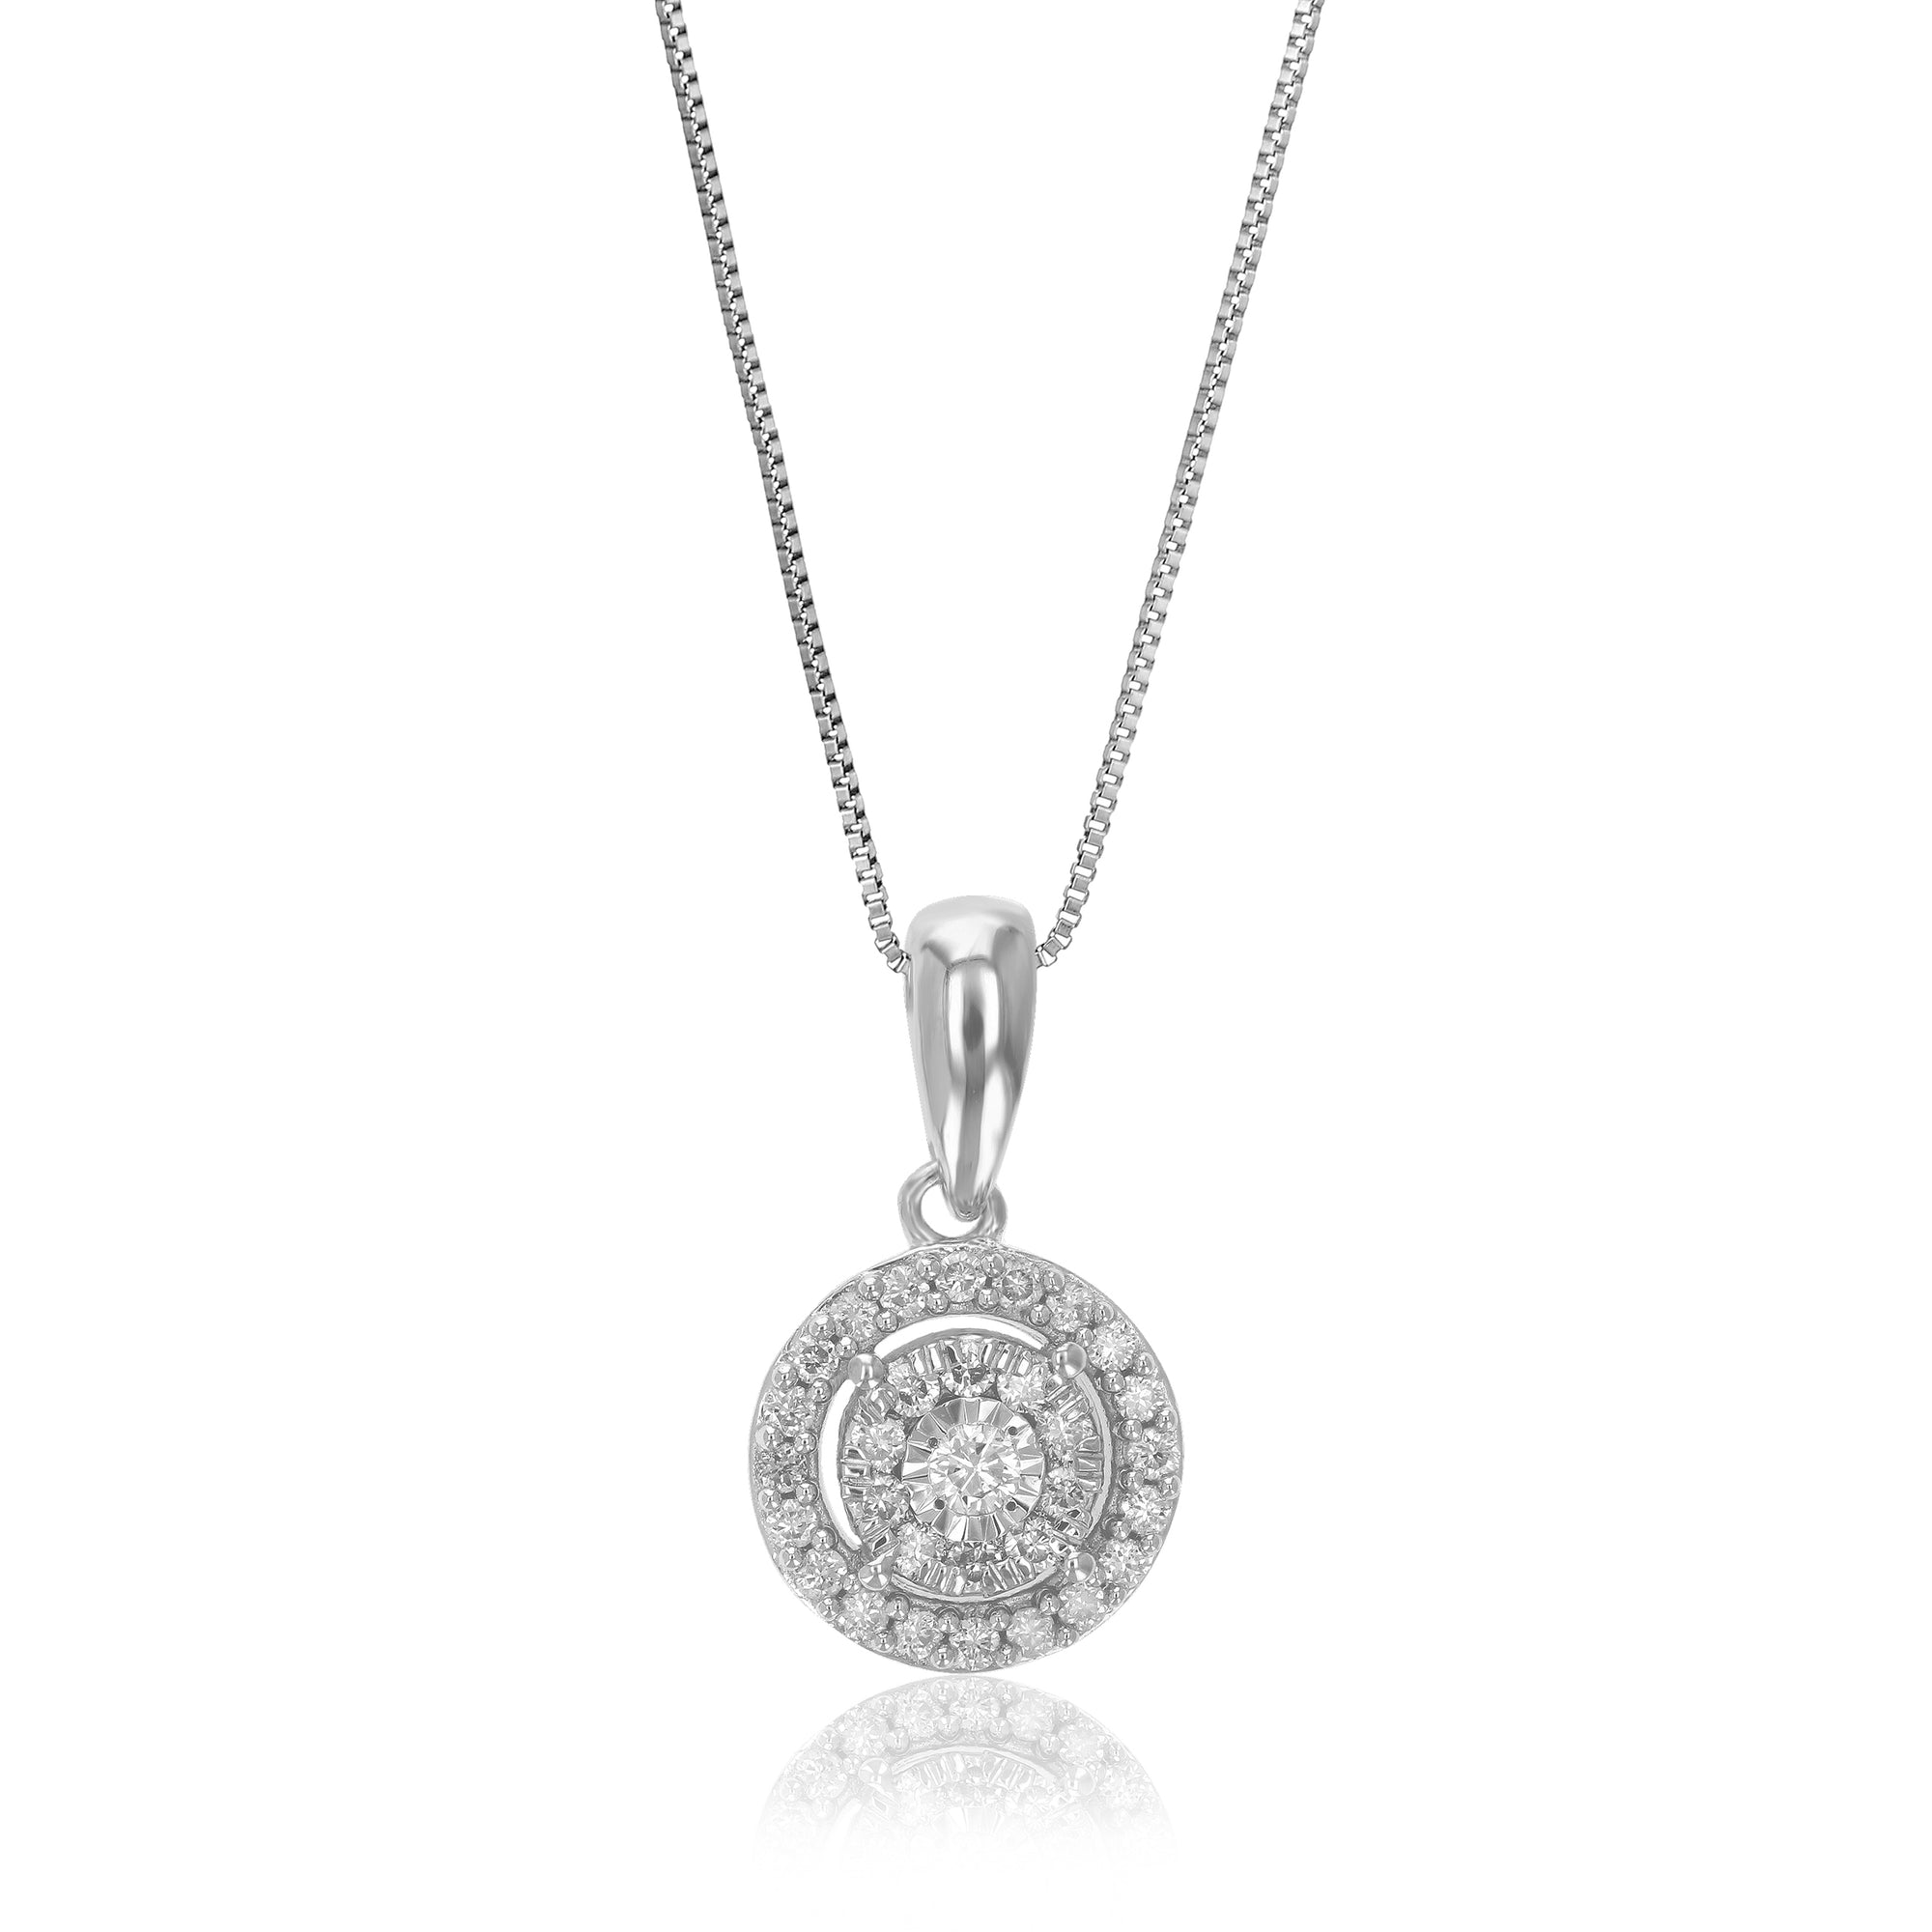 1/6 cttw Diamond Pendant Necklace for Women, Lab Grown Diamond Round Pendant Necklace in .925 Sterling Silver with Chain, Size 2/3 Inch